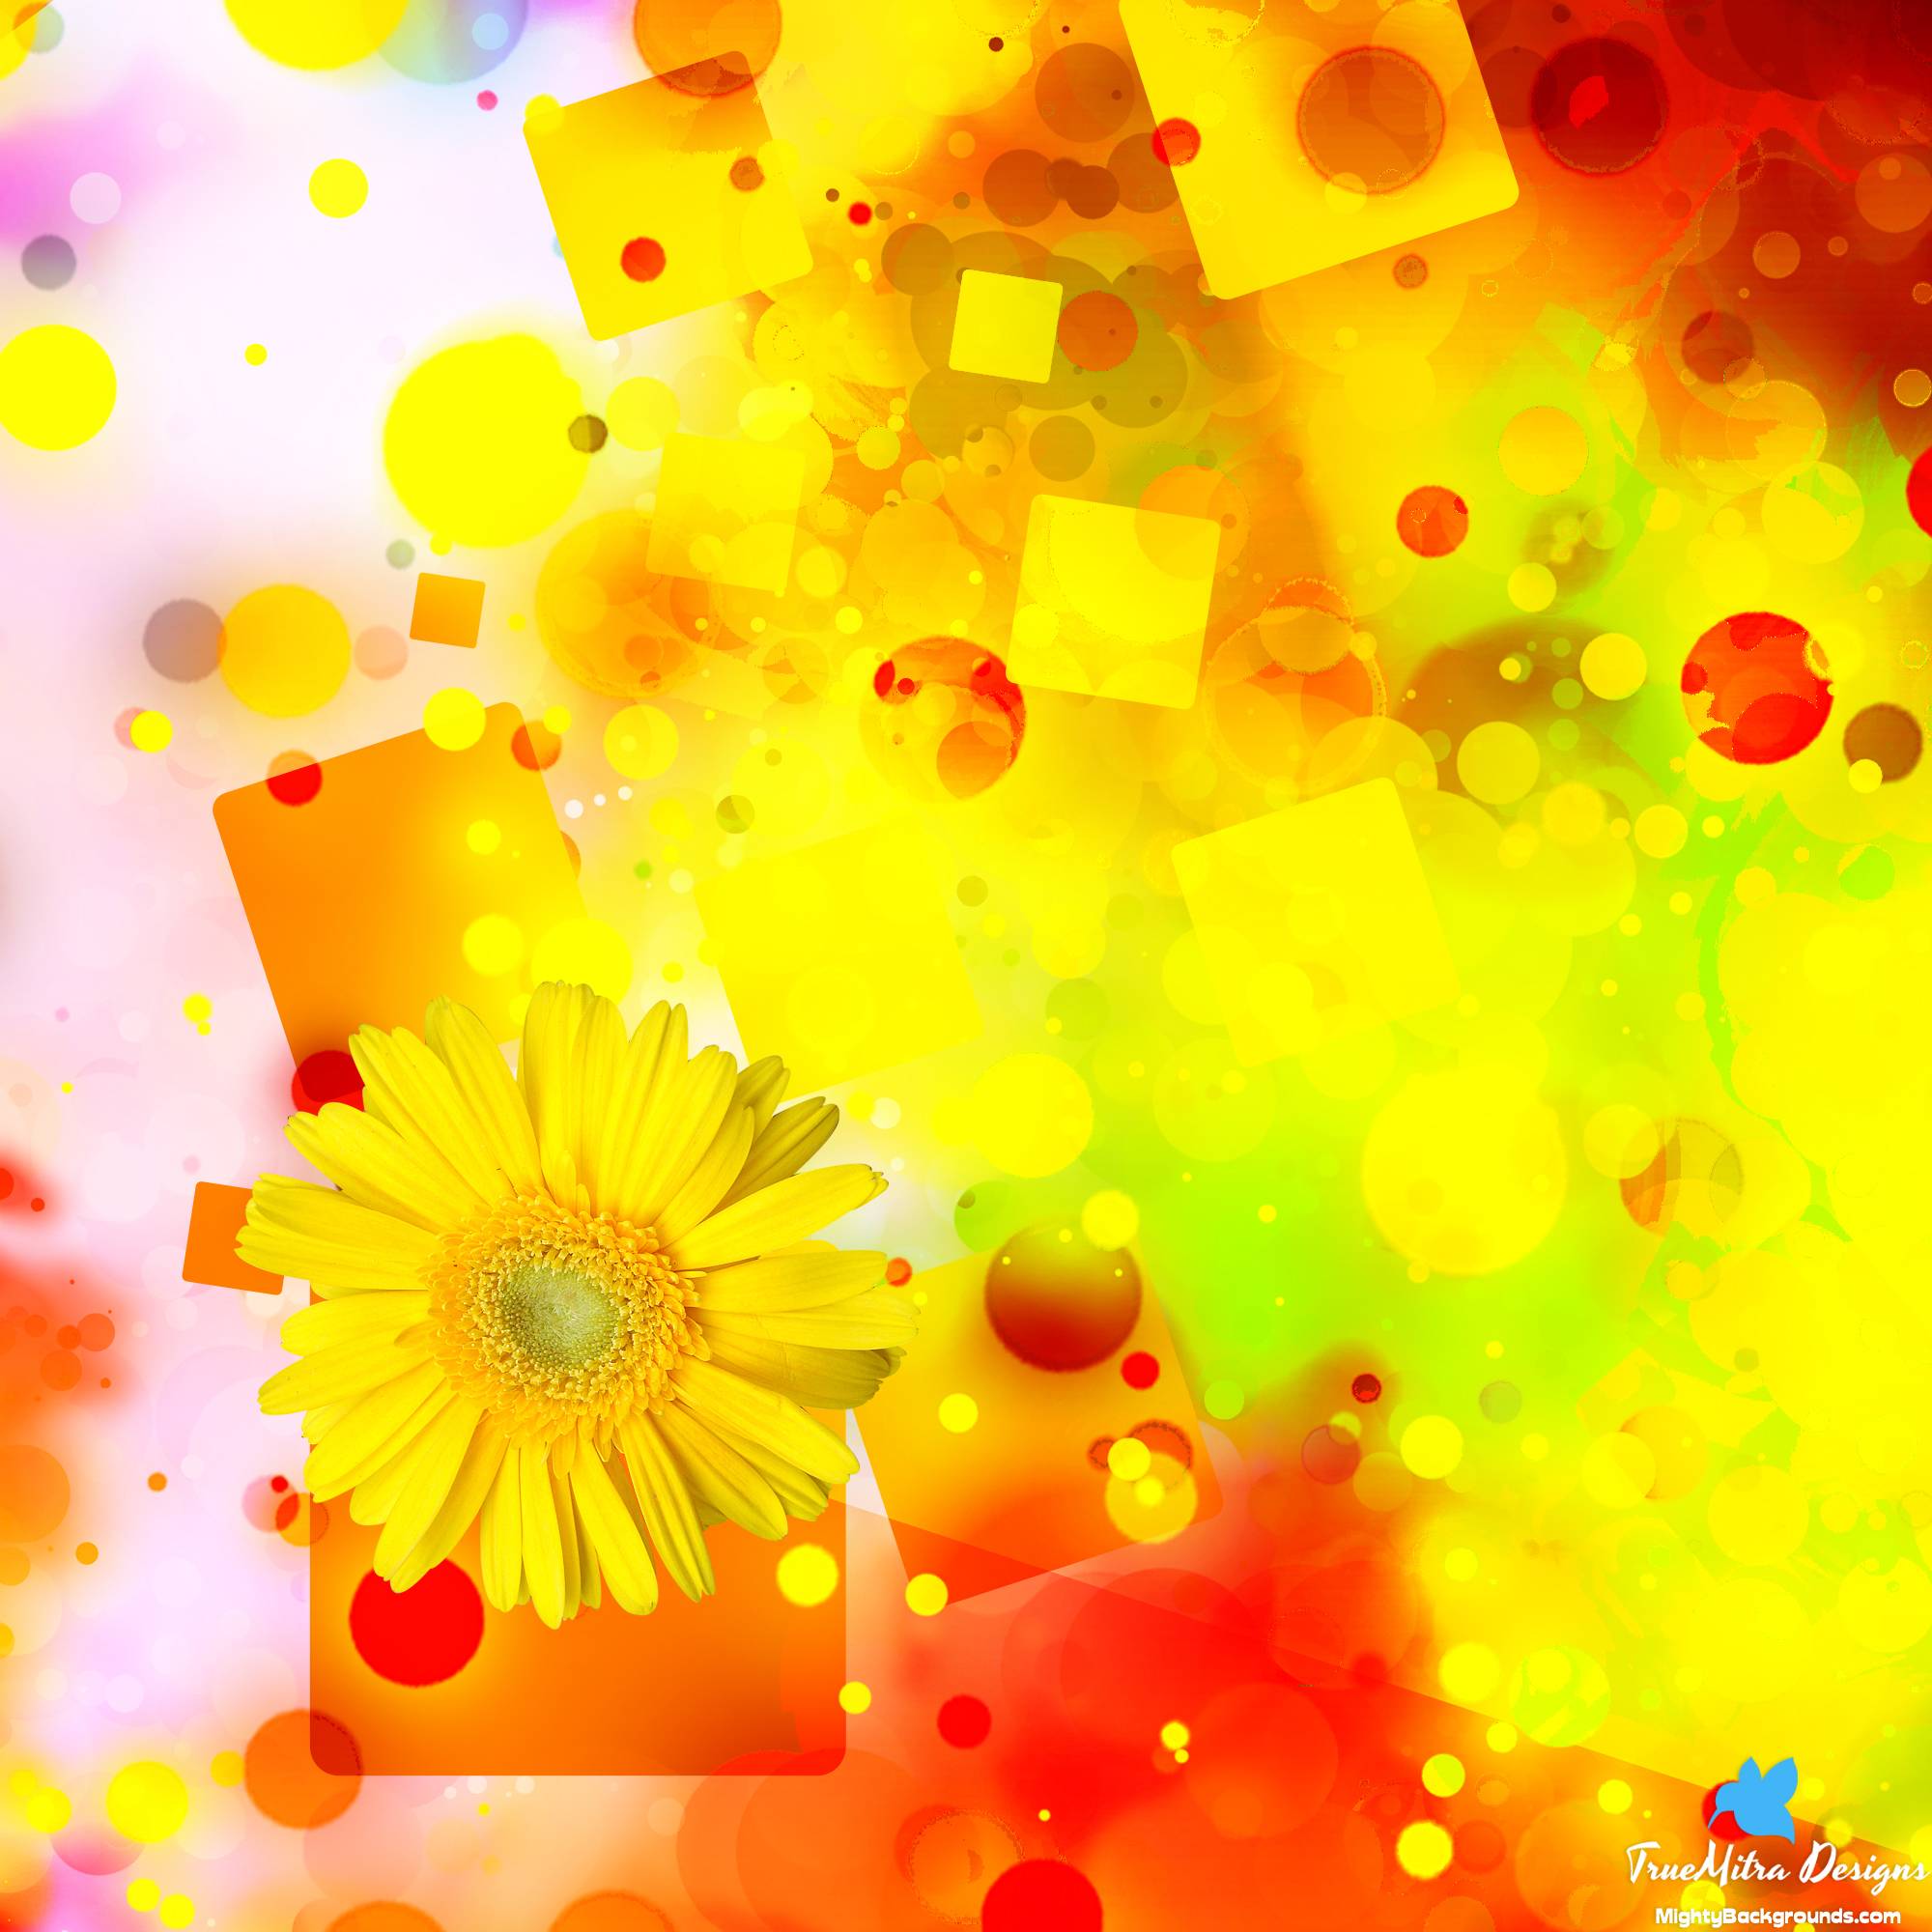 Bright Yellow Flower Abstract 308012 Image HD Wallpaper. Wallfoy